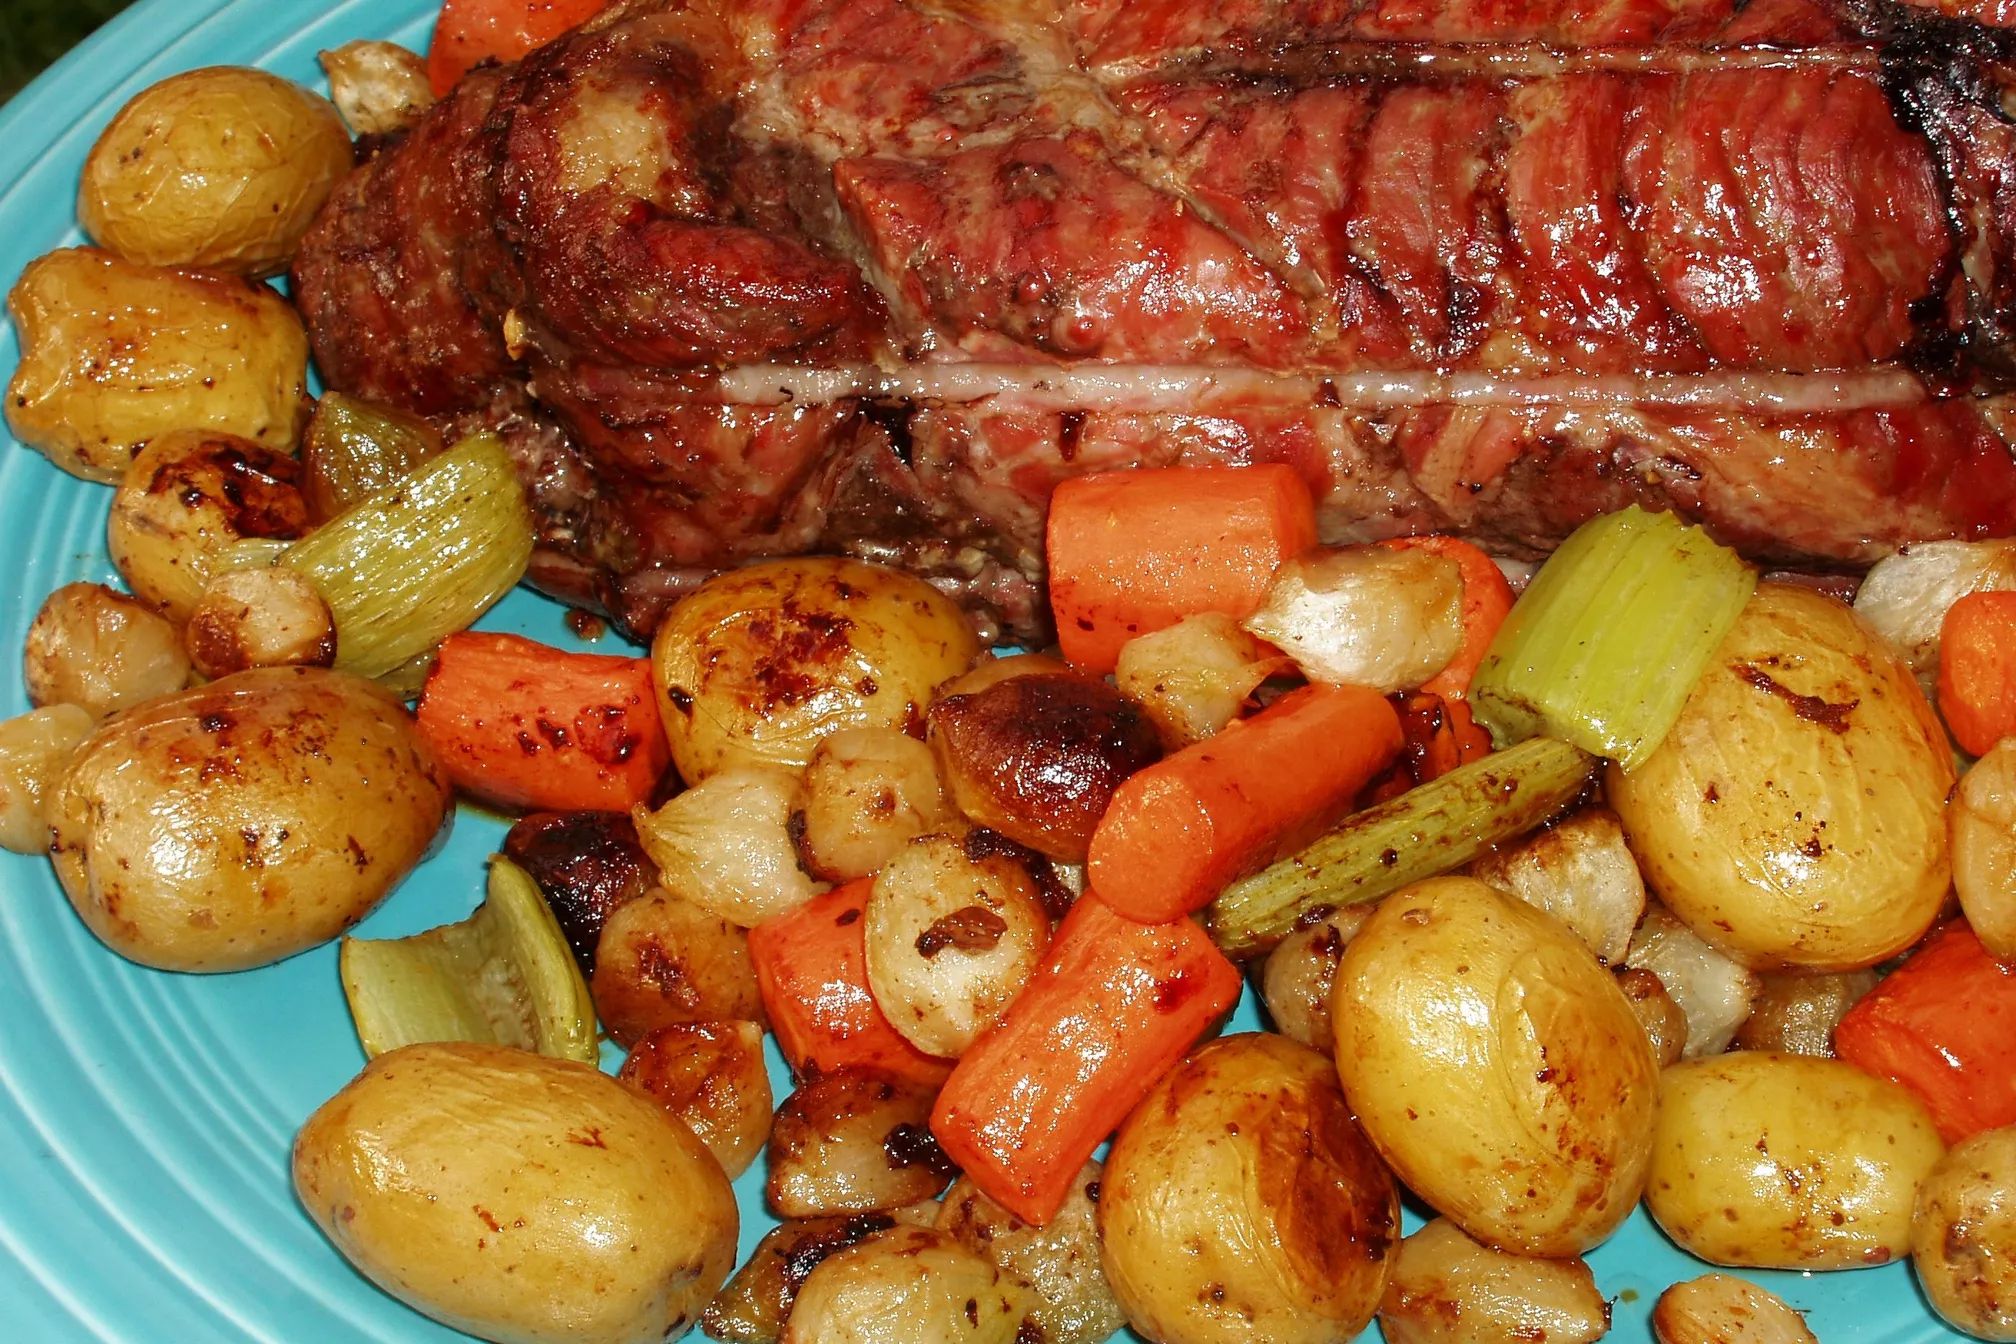 Best Pork Roast With Vegetables Recipe How To Roast Pork With Potatoes Carrots